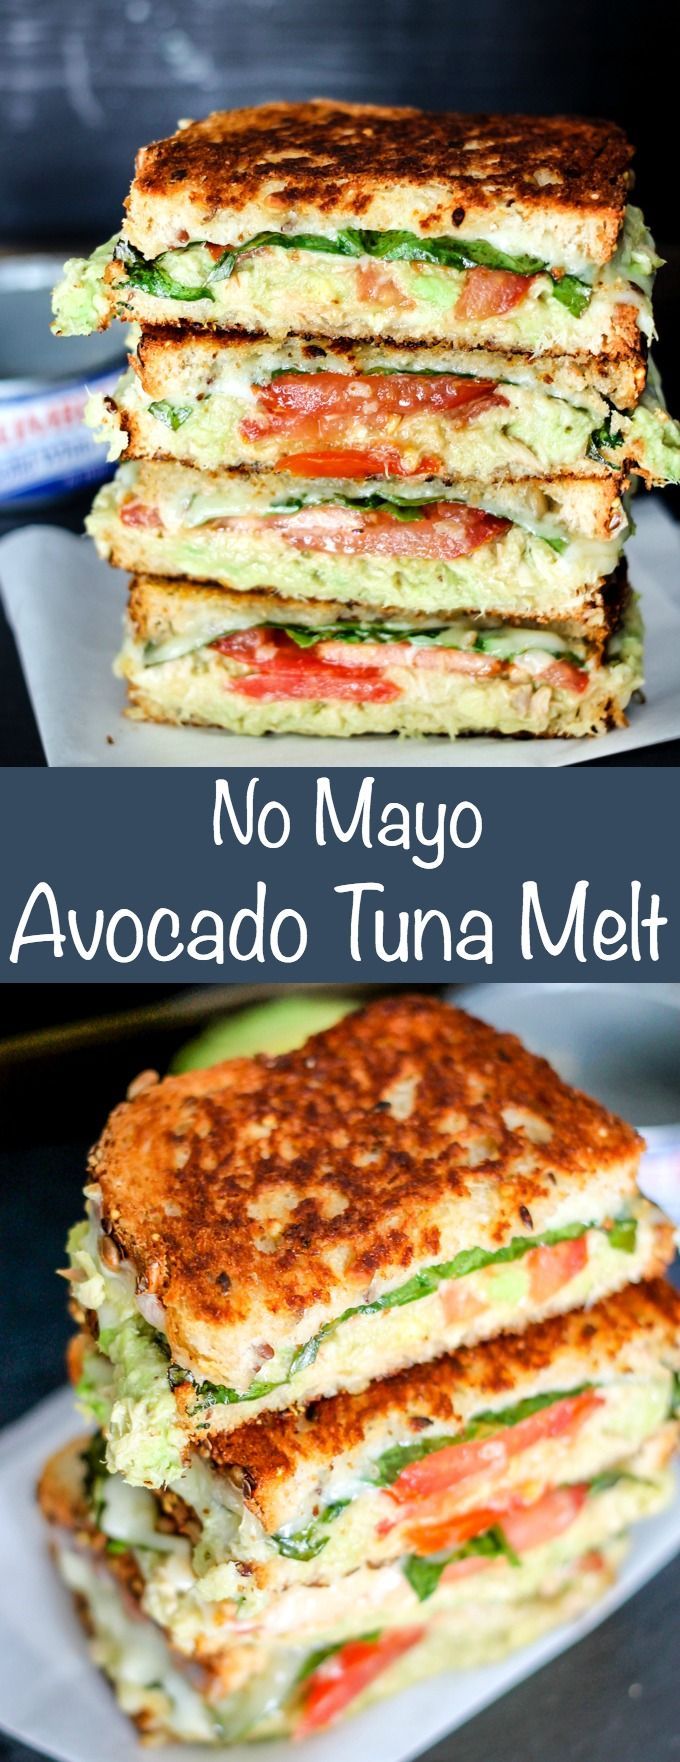 No Mayo Avocado Tuna Melt is the perfect lunch to get out of the midweek slump! Filled with solid white albacore tuna and veggies,